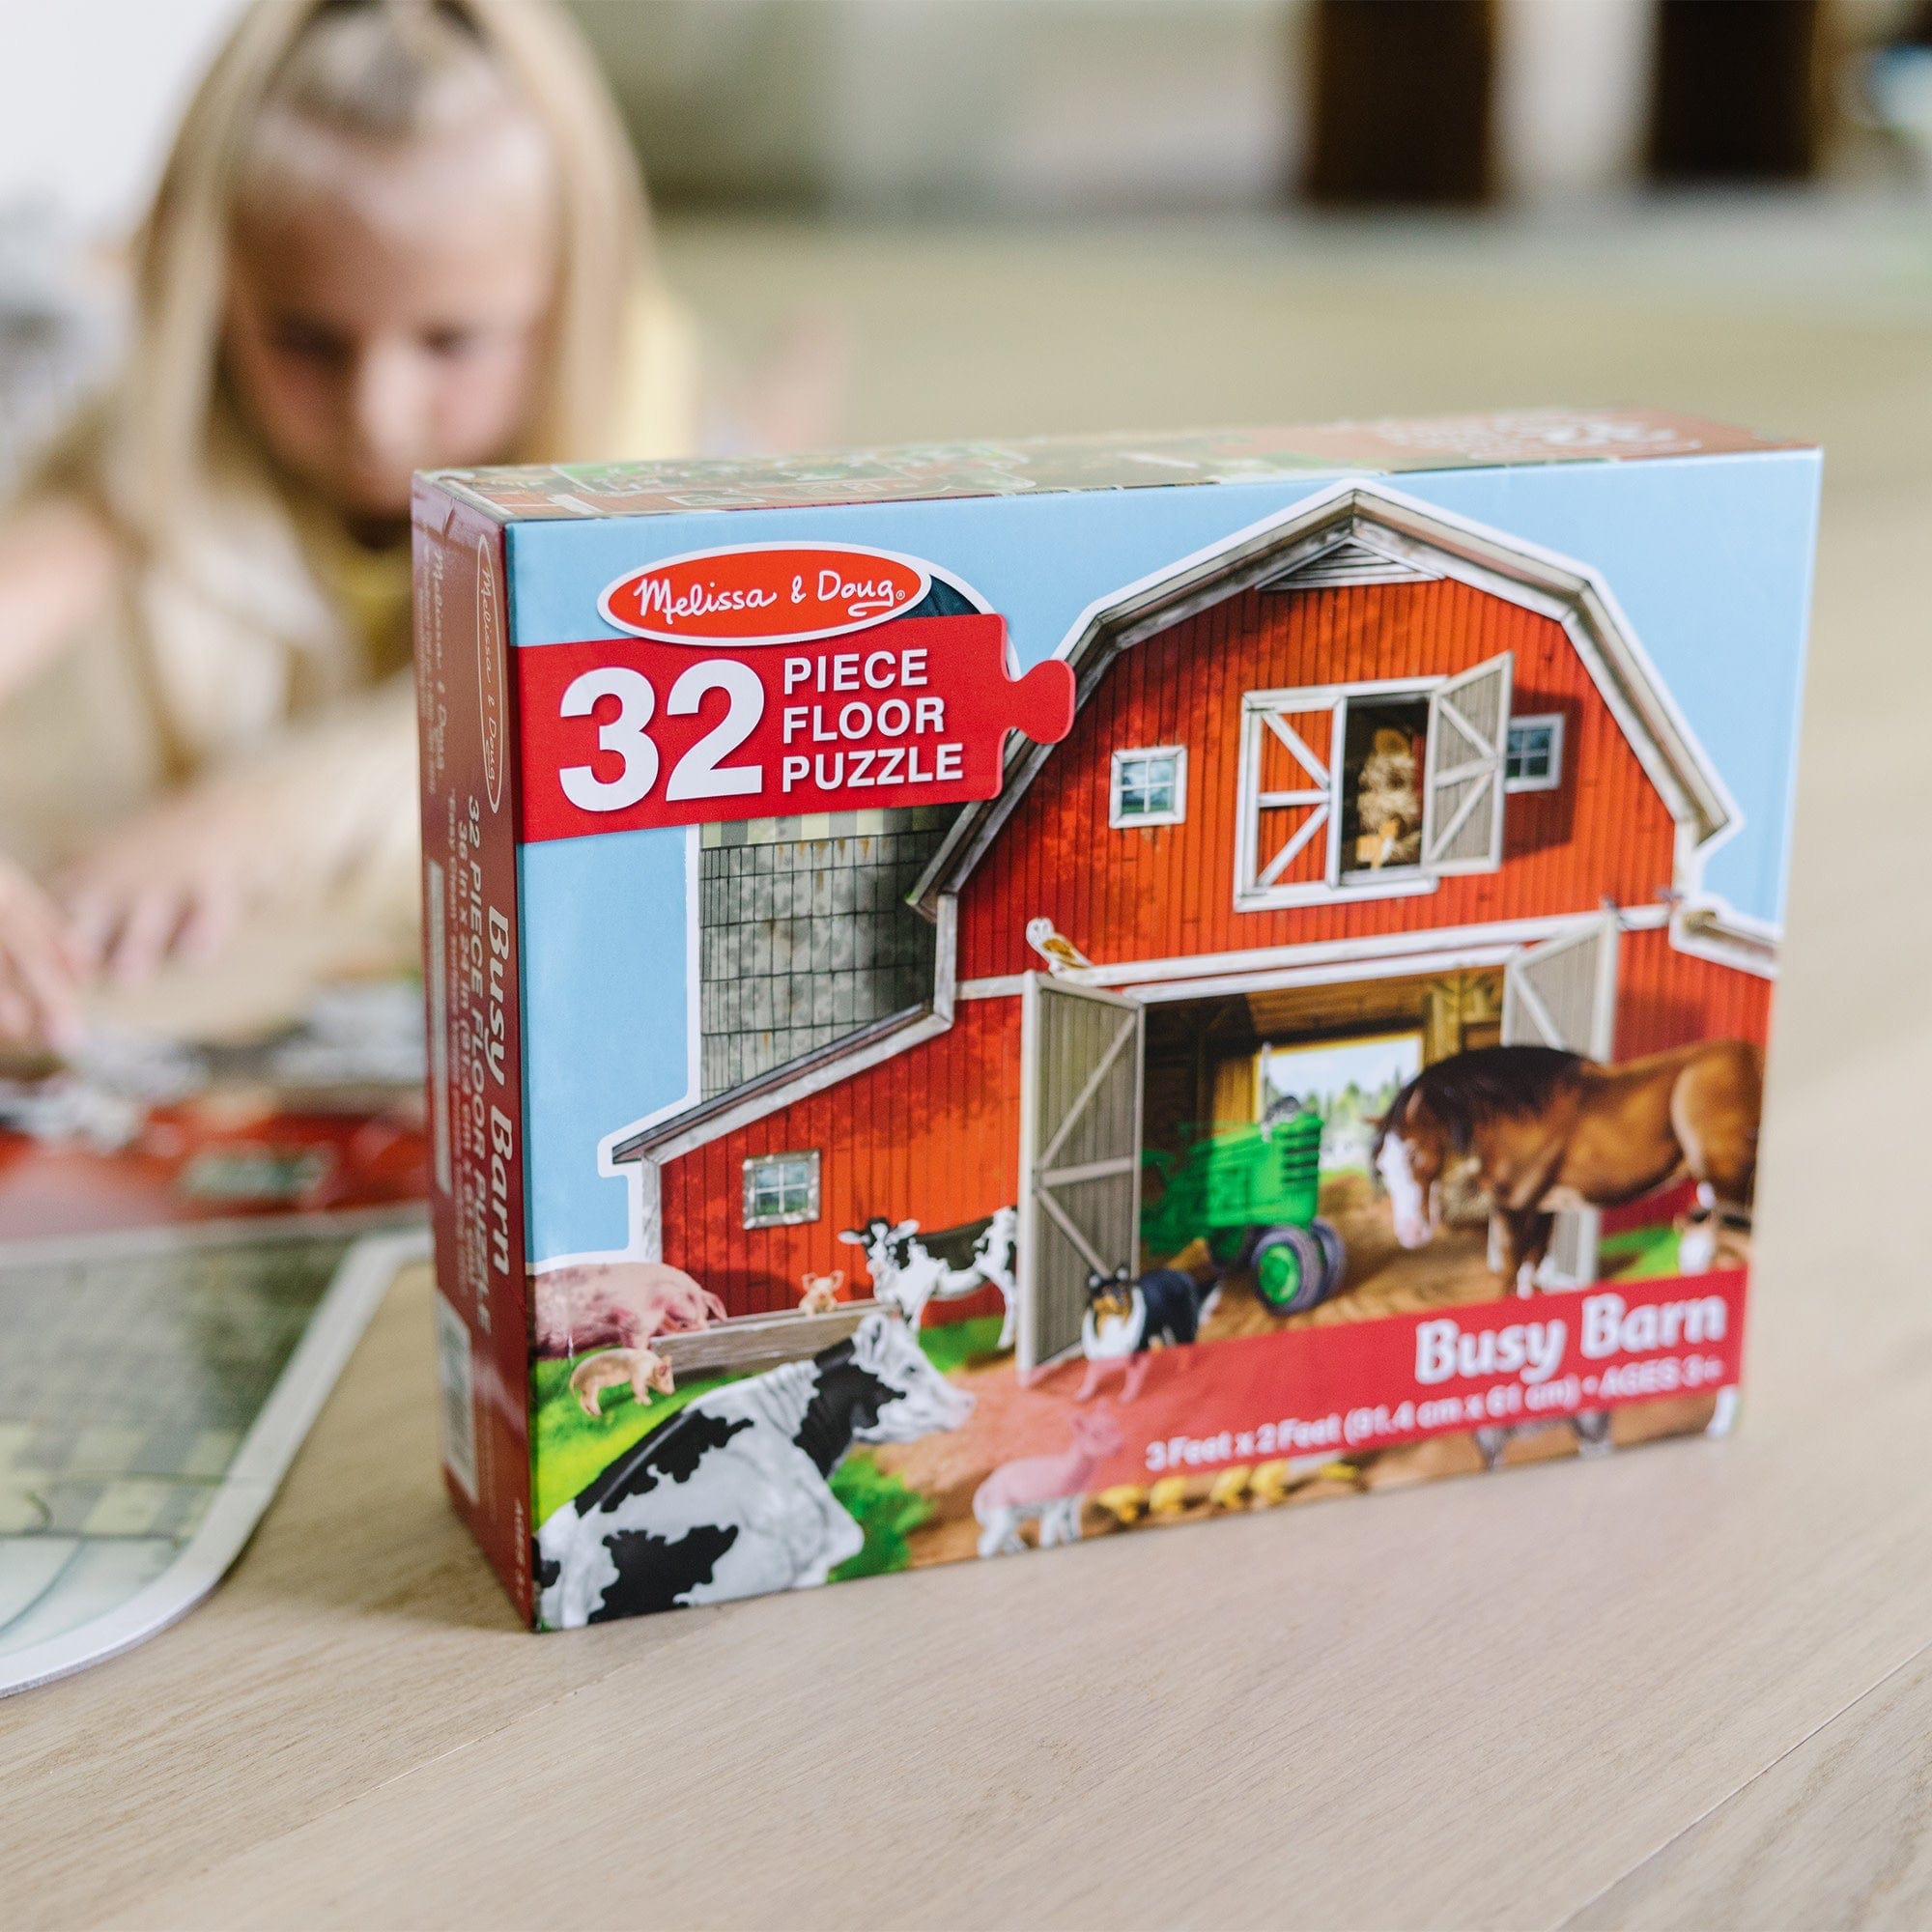 Melissa & Doug Melissa & Doug Busy Barn Shaped Floor Puzzle 32 Pieces - Little Miss Muffin Children & Home